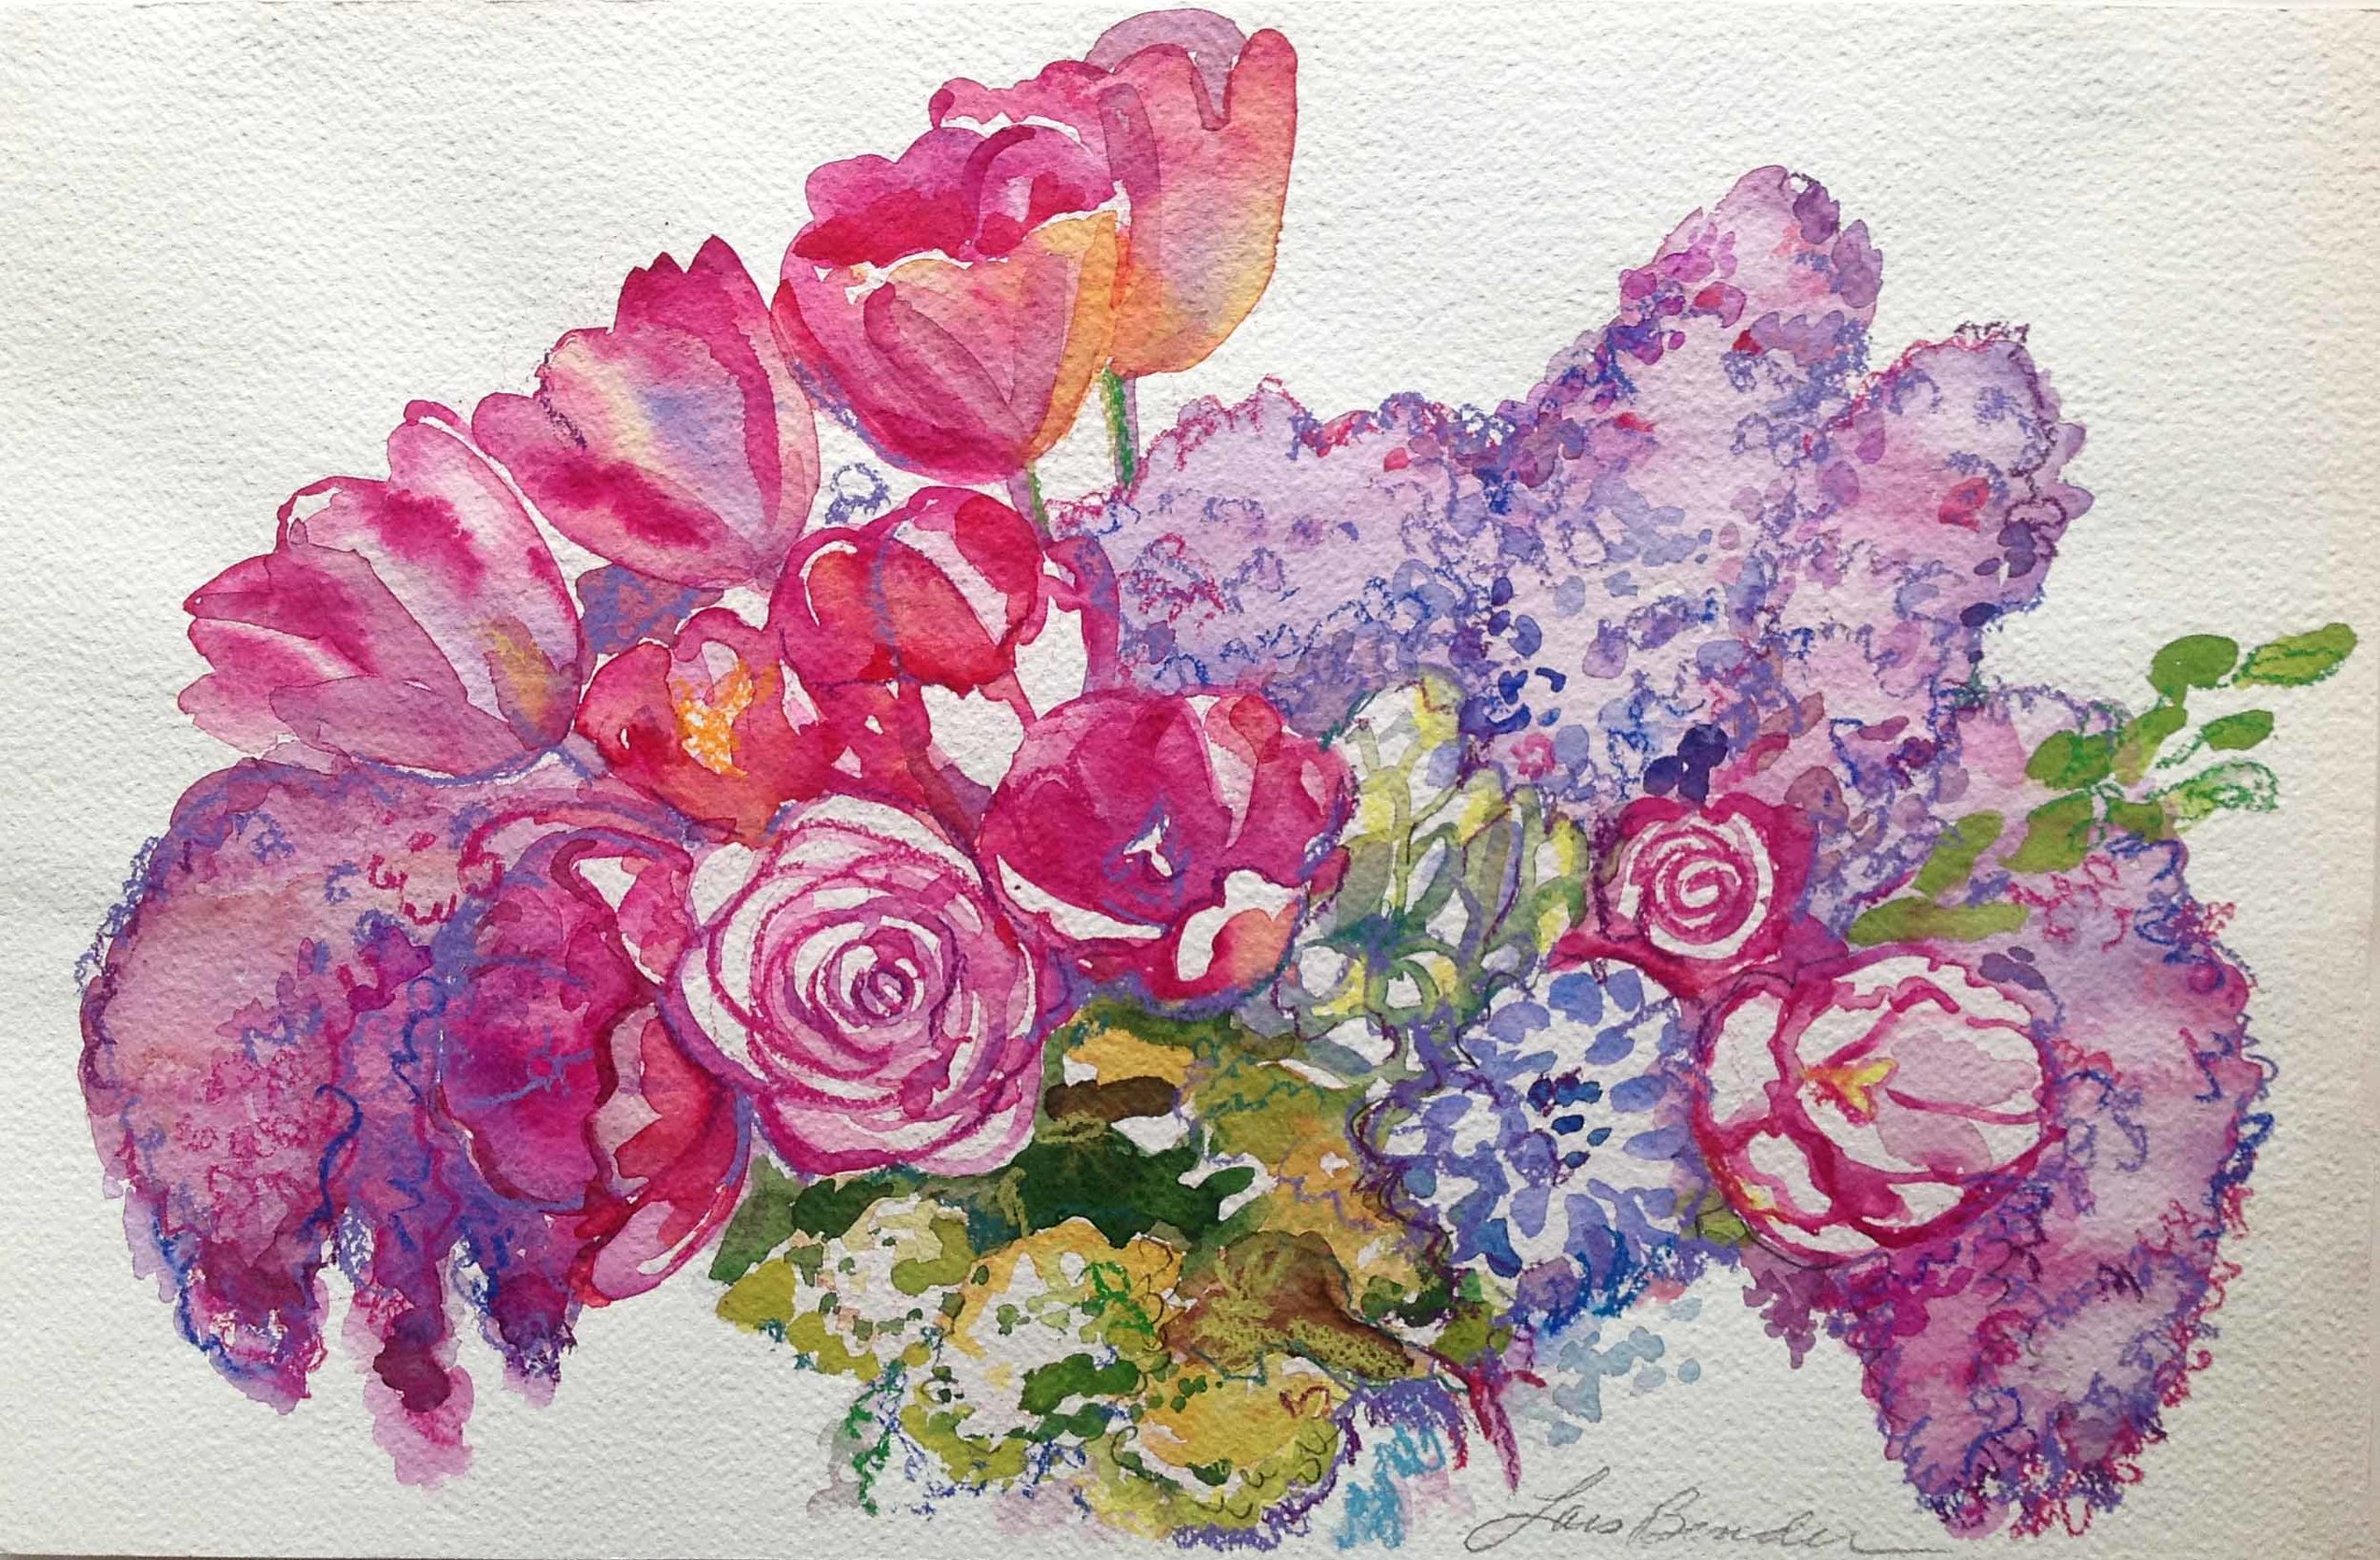 "Lilacs, Tulips and Roses Bouquet II"